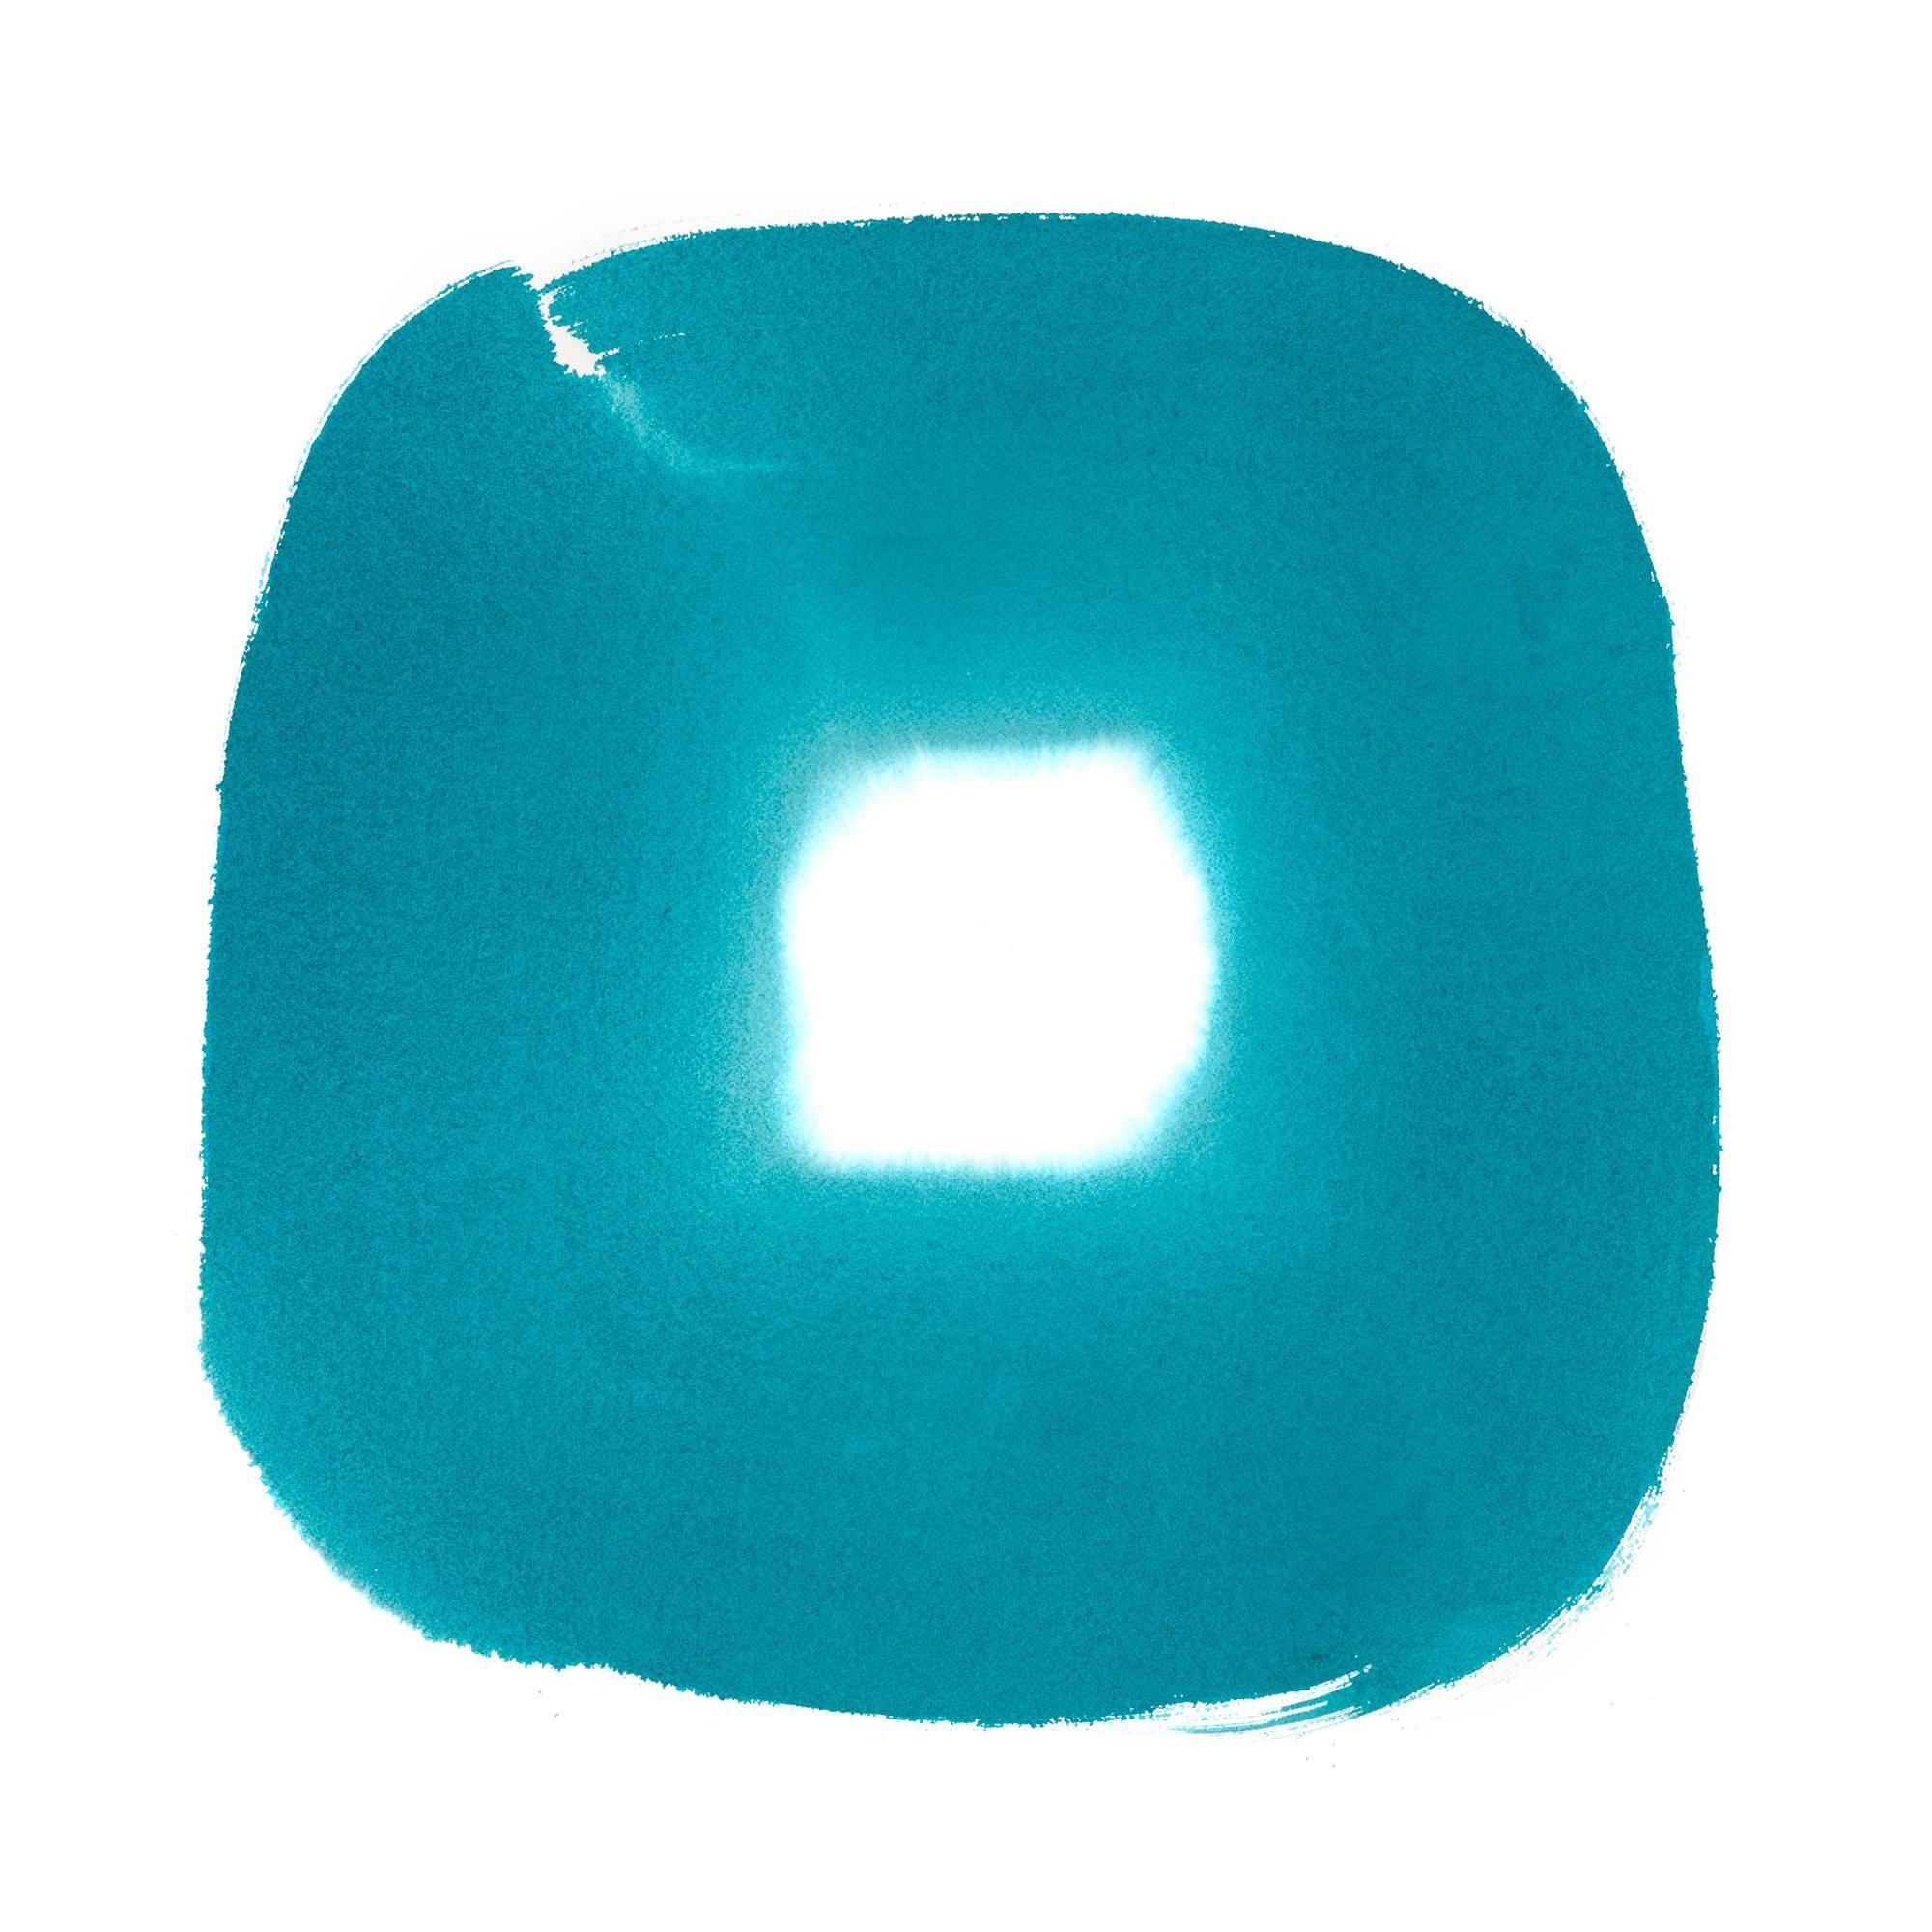 Véronique Gambier Abstract Print - Aperture in Turquoise XXVII_Print Edition 12 of 20